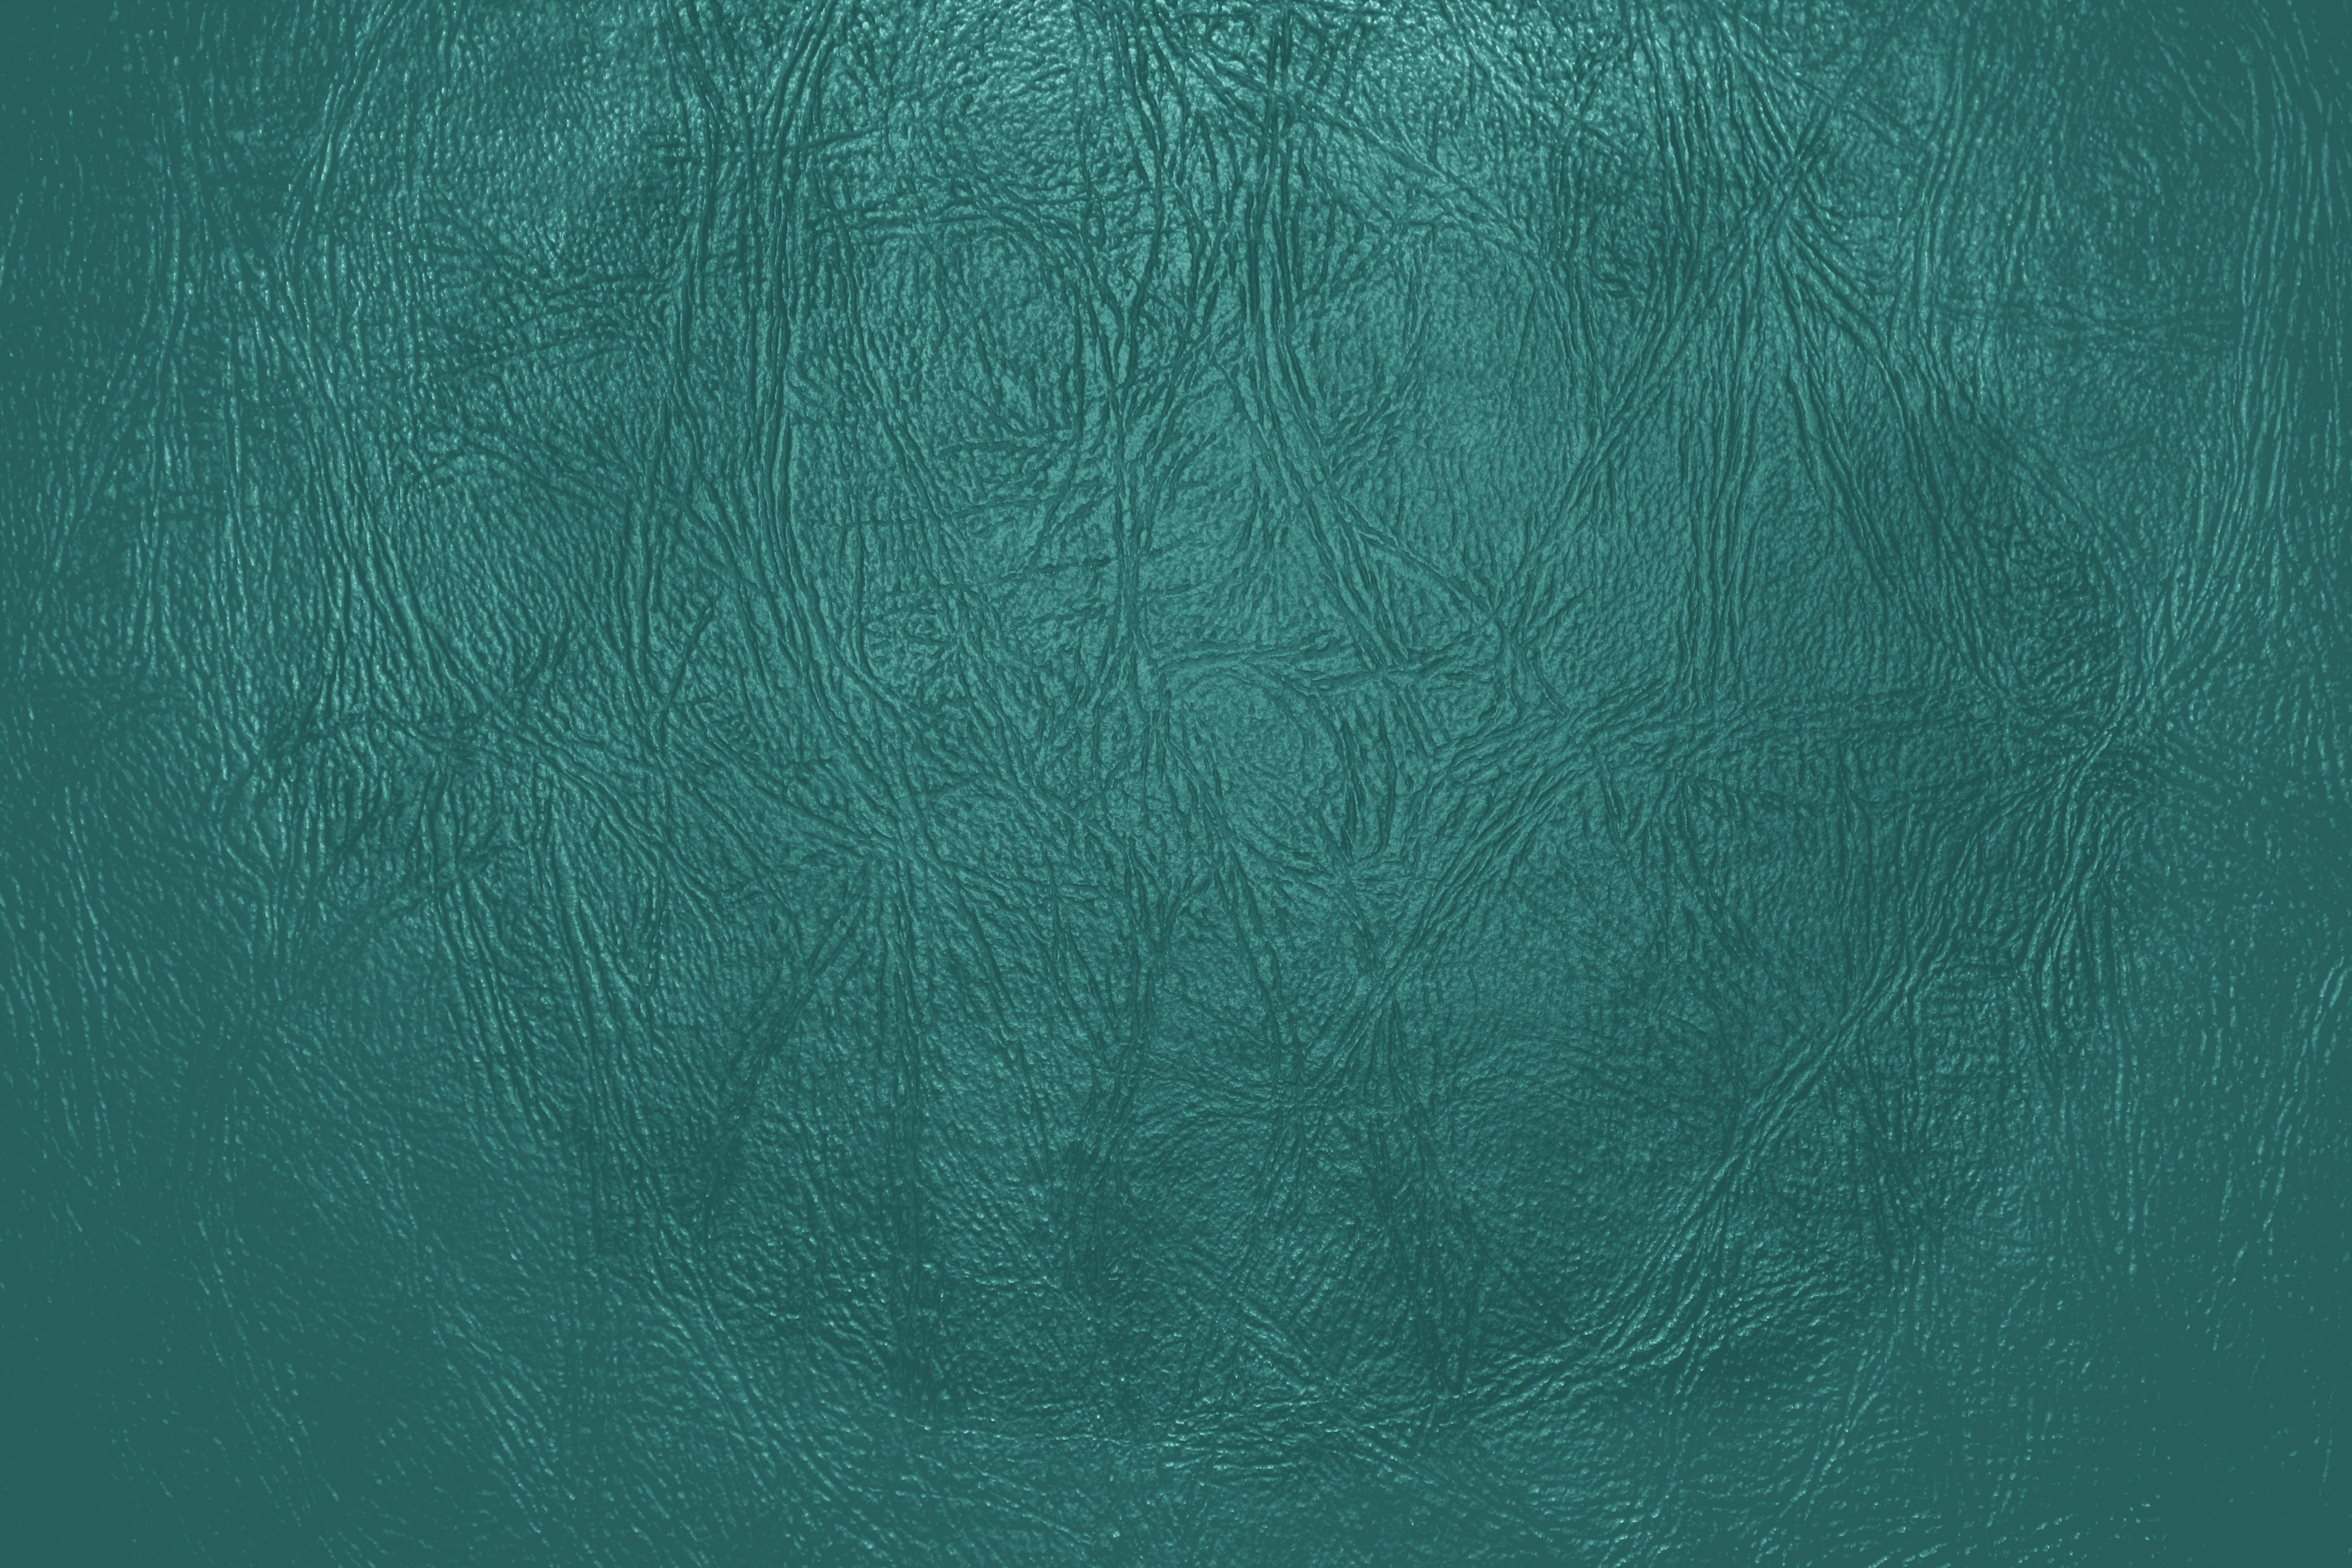 Teal Leather Close Up Texture Picture Free Photograph Photos